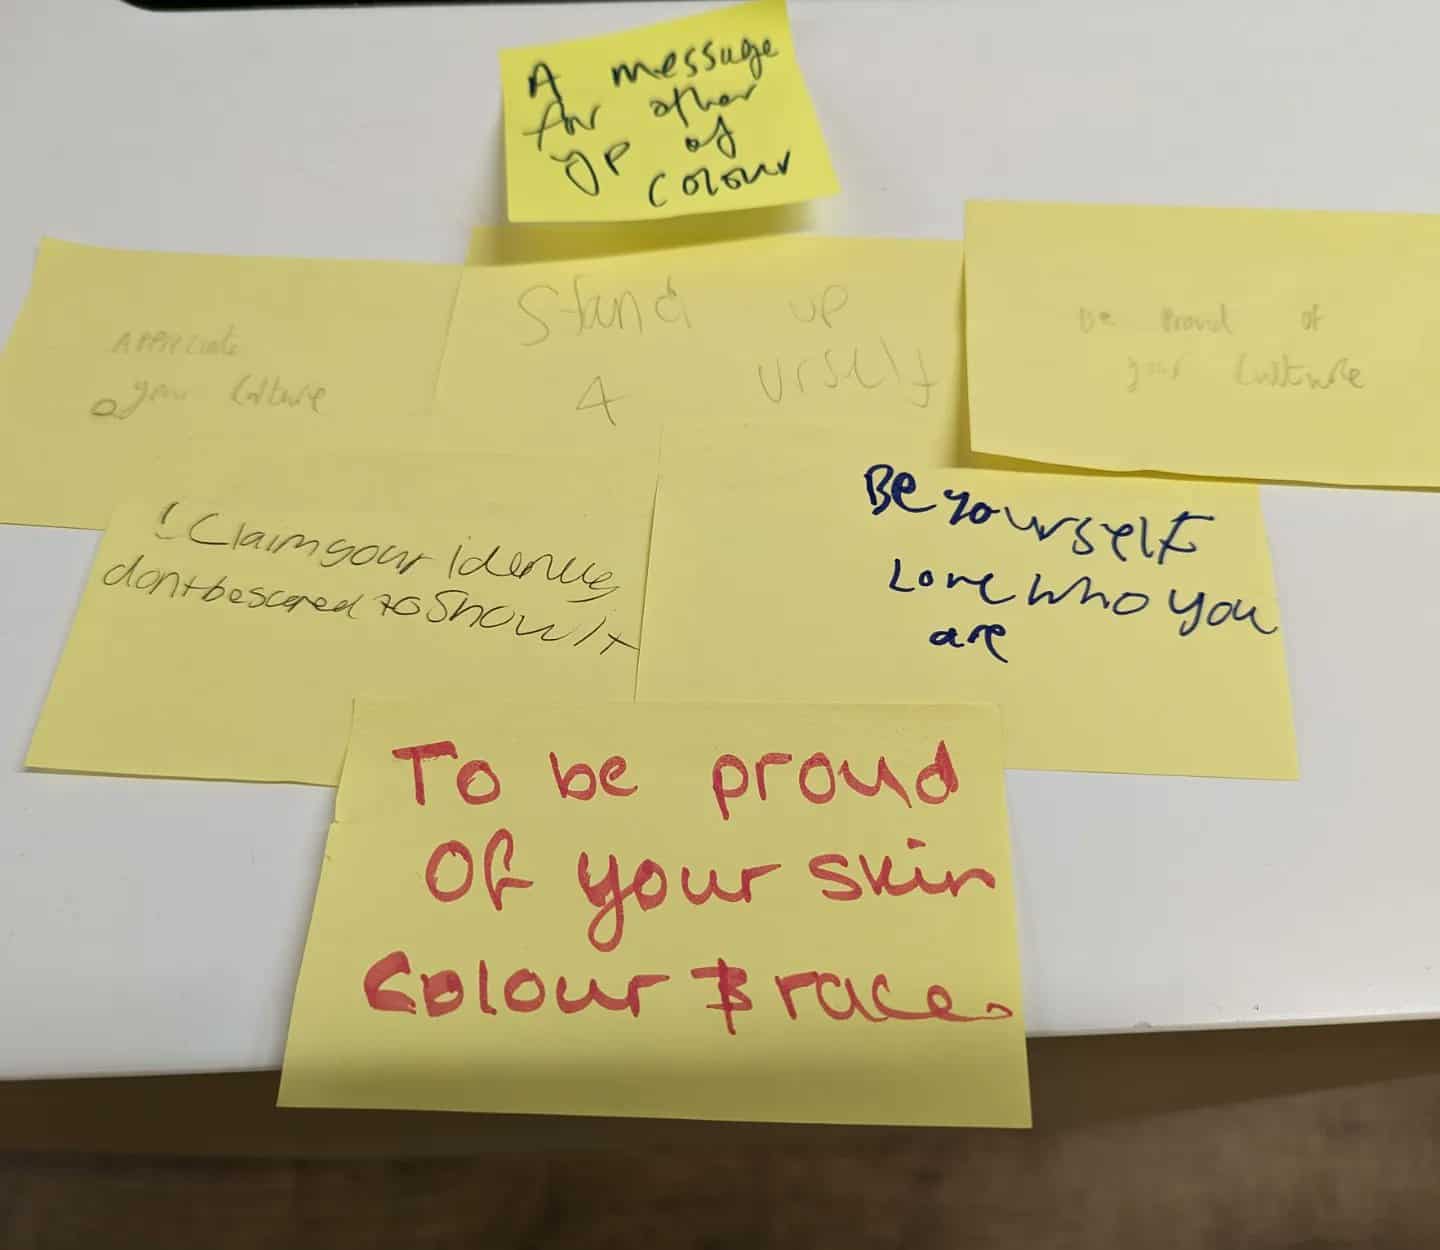 Post it notes written by Year 9 Didsbury High School students after working with Kids of Colour. They read: "Messages for other young people of colour" "Appreciate your culture" "Be yourself, love who you are" "Claim your identity, don't be afraid to show it" "Be proud of your culture" "Stand up for yourself" "Be proud of your skin colour and your race"